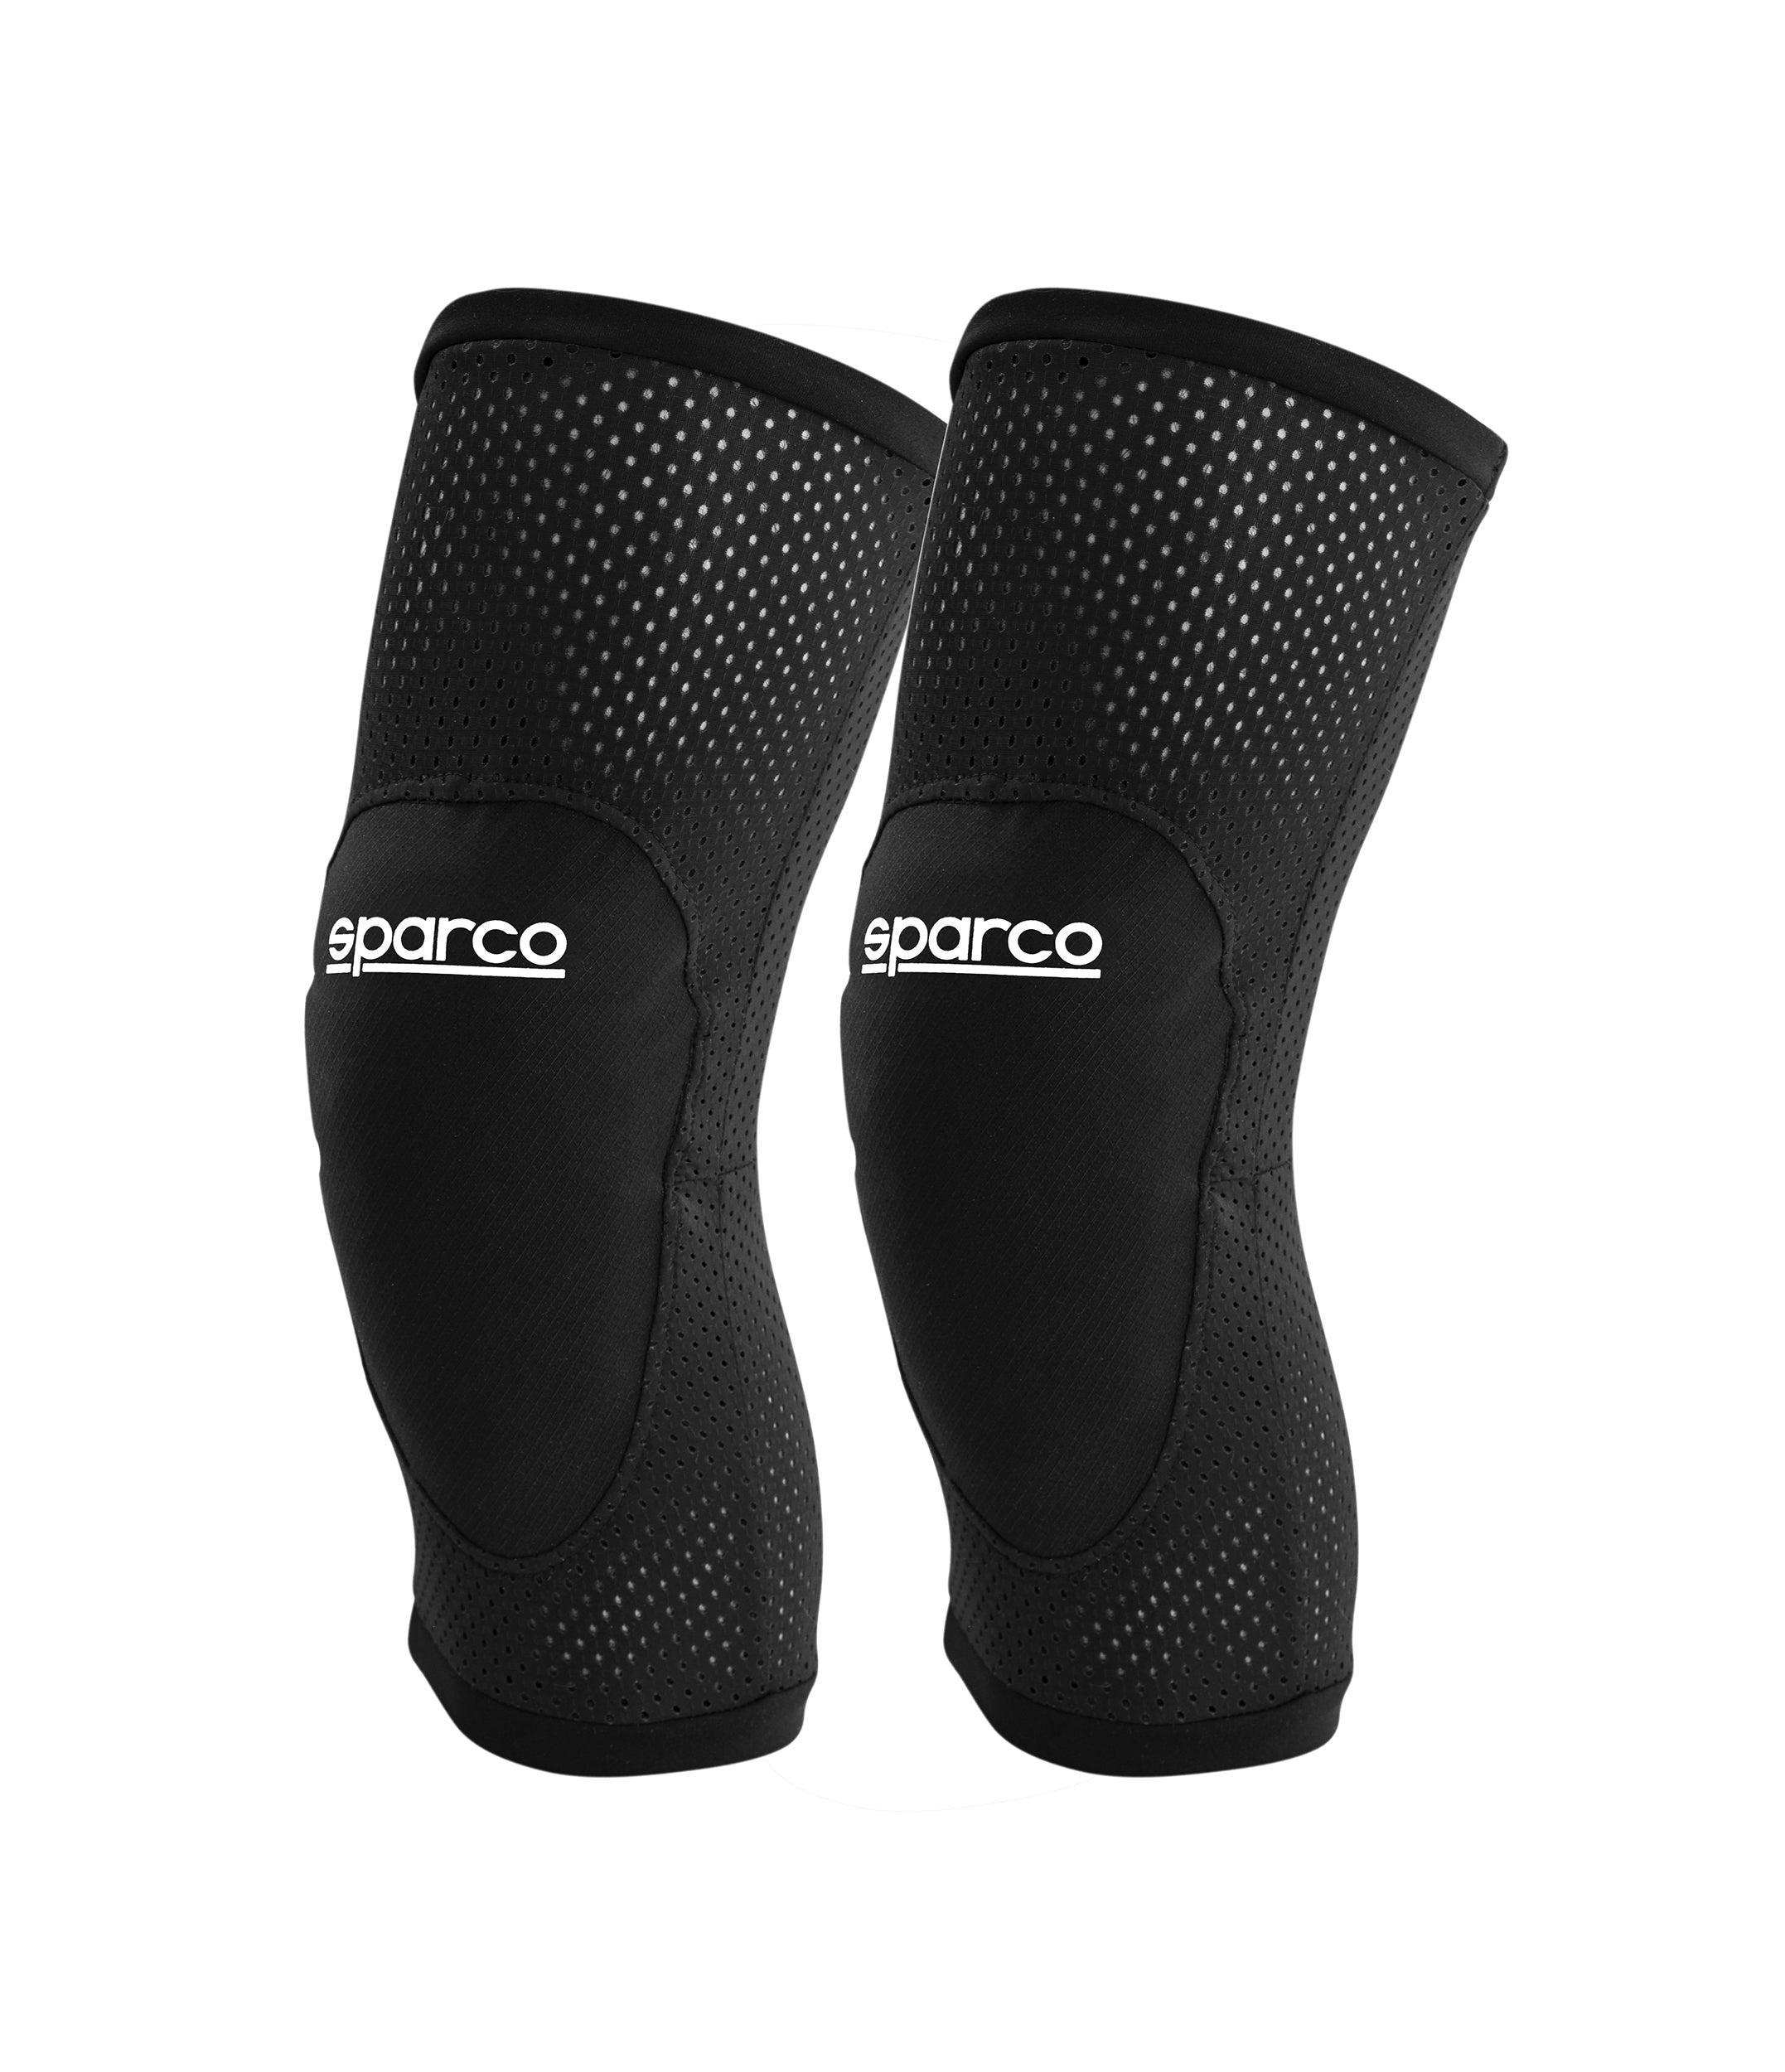 SPARCO 001541KNR2M Knee pads for karting, black, size M Photo-0 